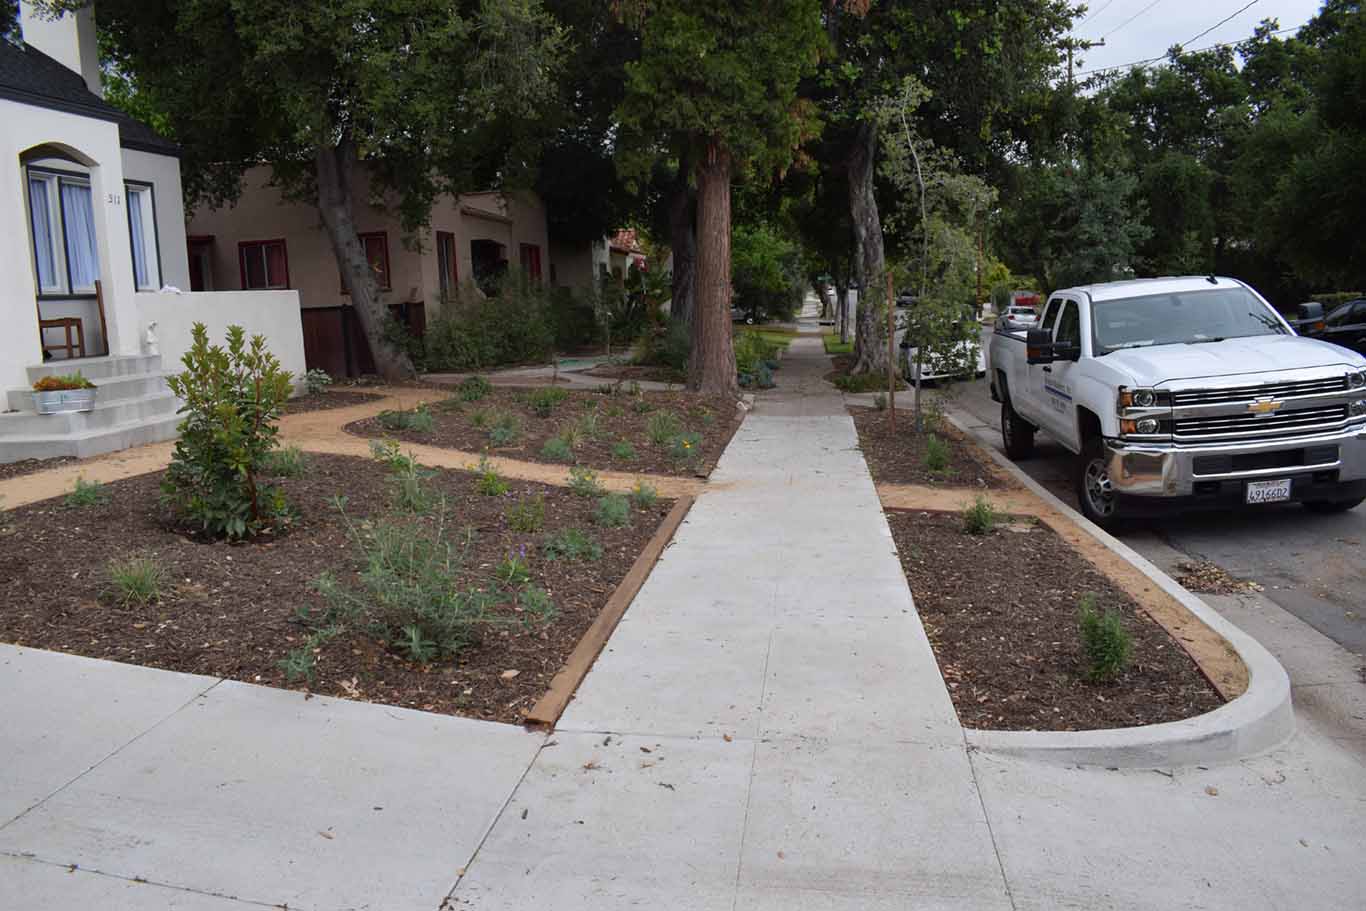 Decomposed granite pathway in a newly planted garden showing the path and a narrow “walking strip” to allow car doors to open and people to walk along the curb to the central path. If the parking strip planter was wider, a wider walking strip might be desirable.